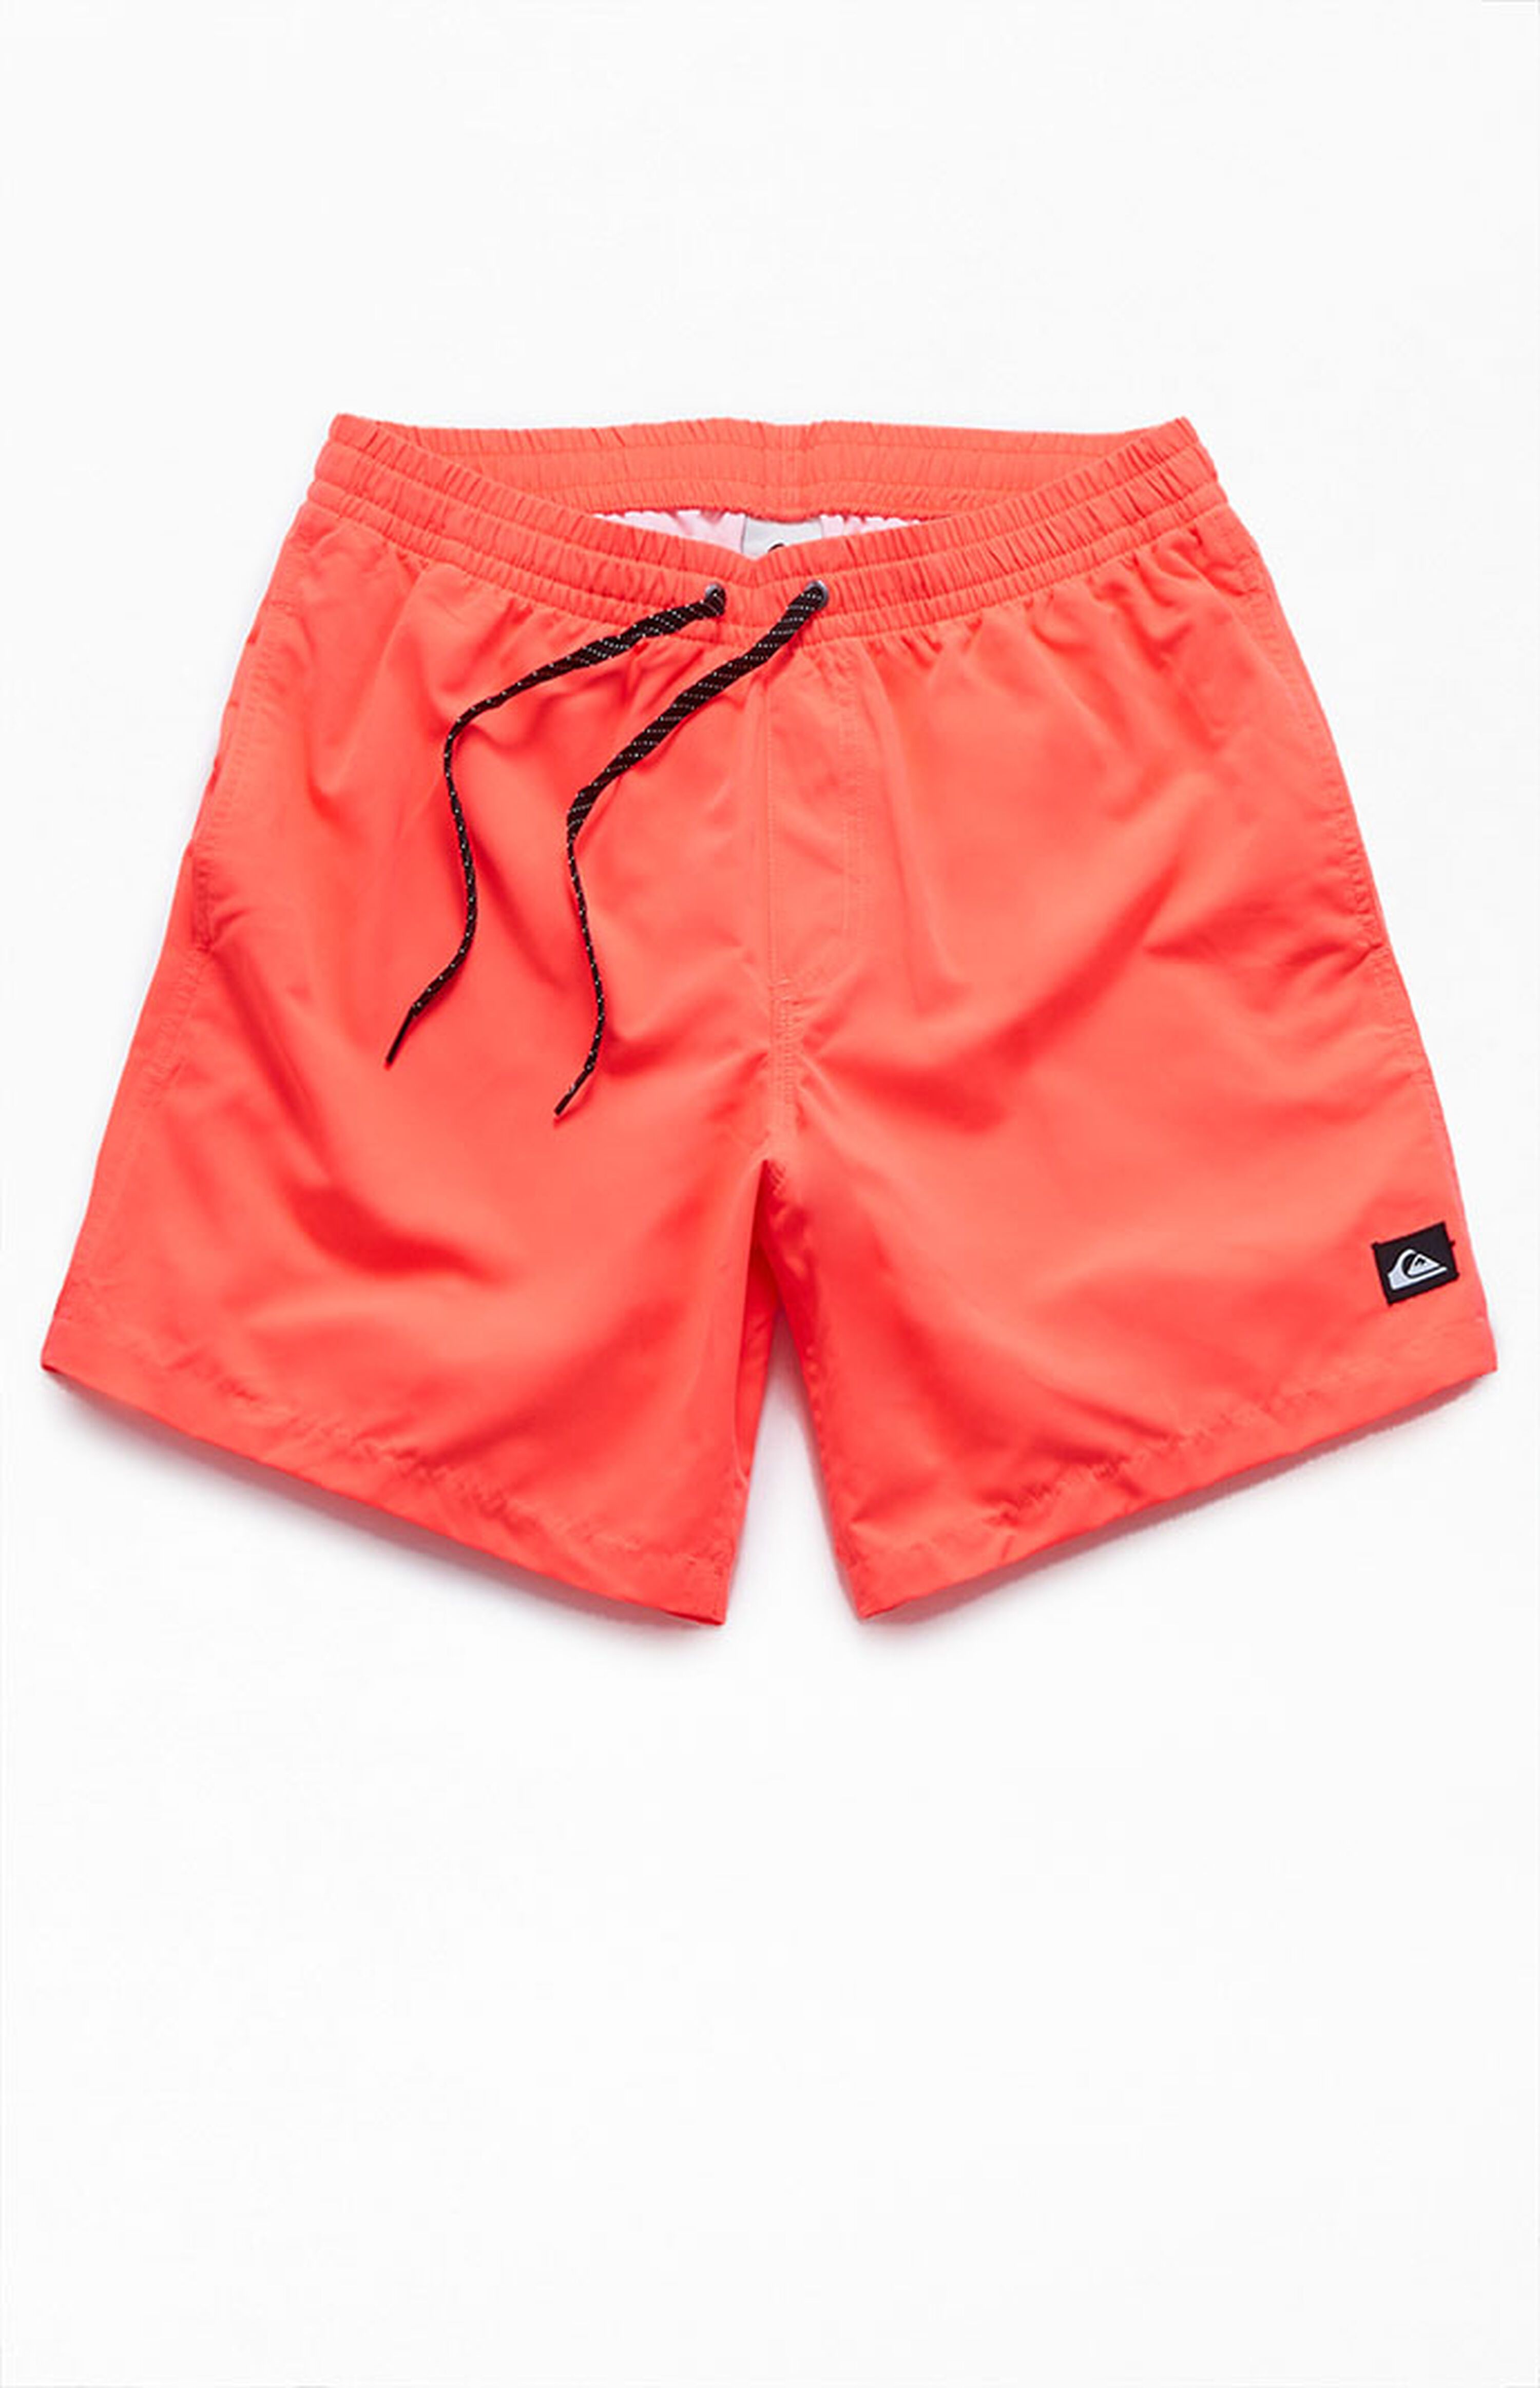 Quiksilver Recycled Everyday 17" Swim Trunks | PacSun | PacSun